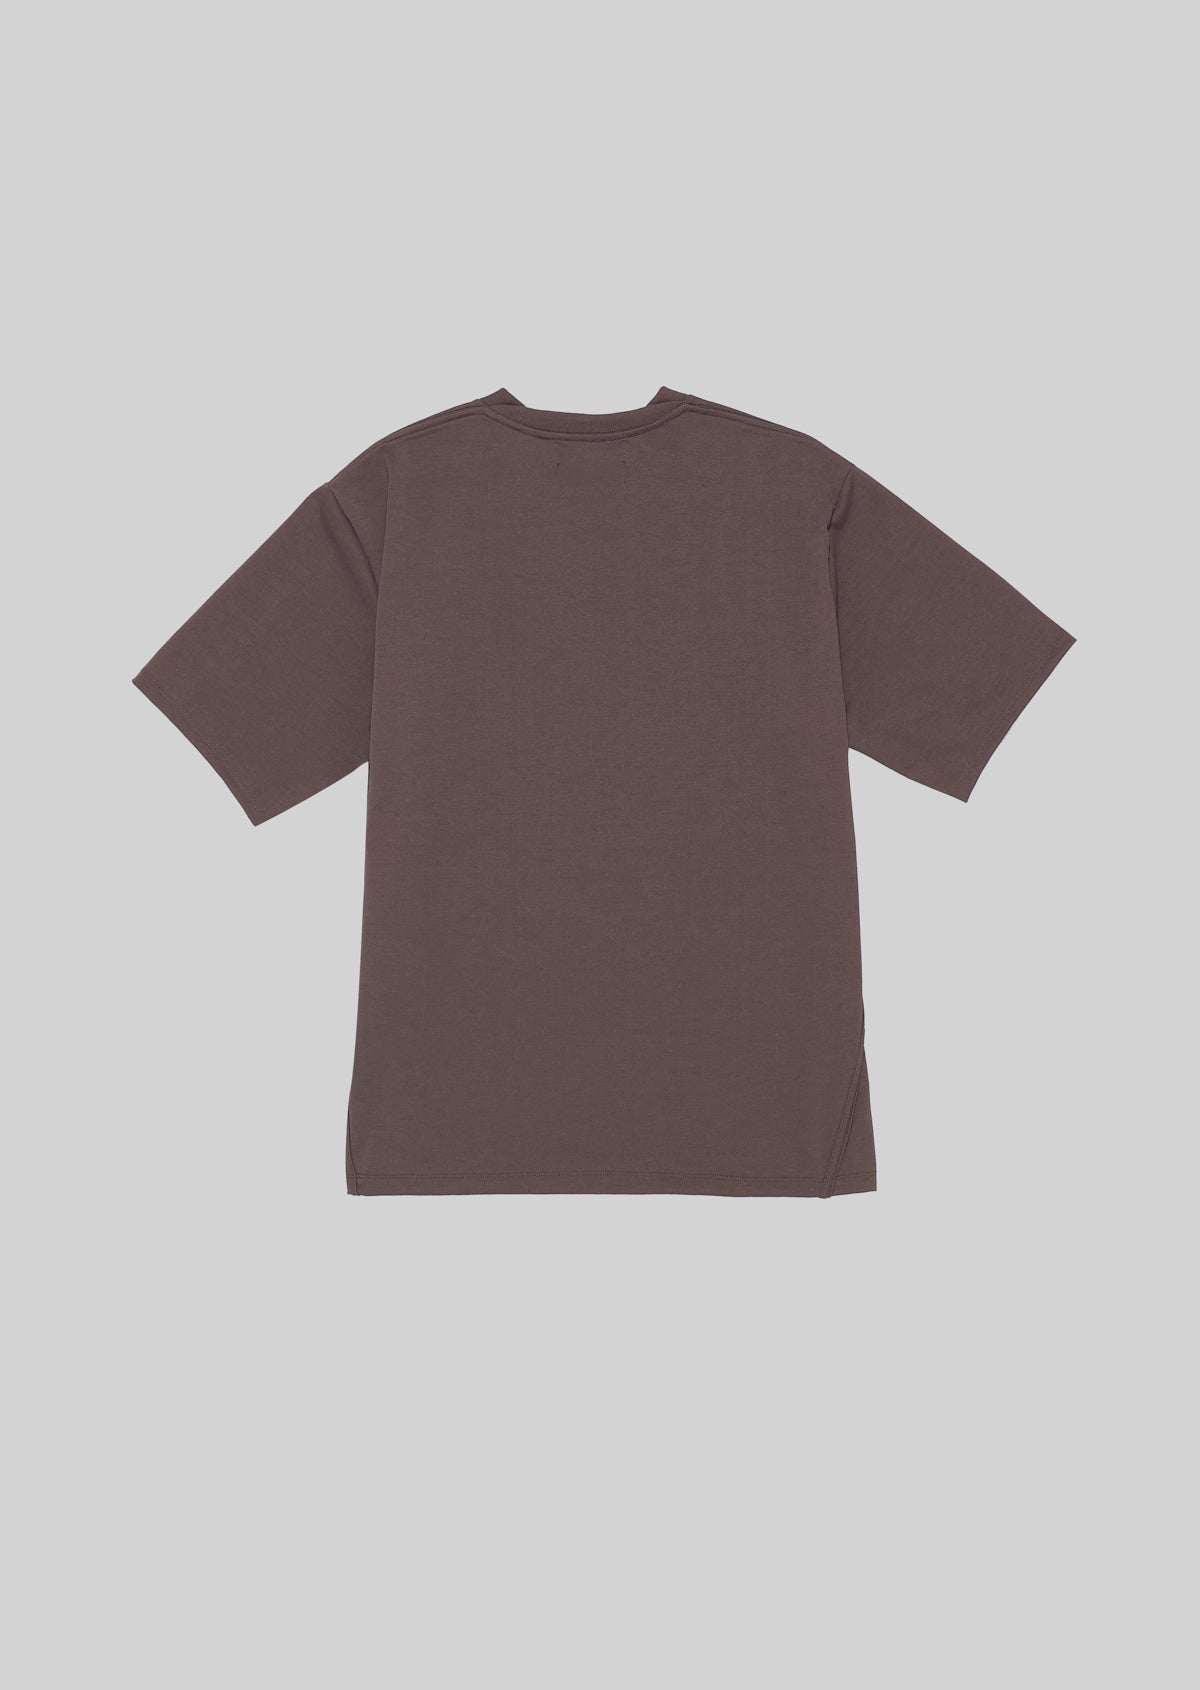 POLYESTER COTTON FEEL T-SHIRT BROWN 8001-1702